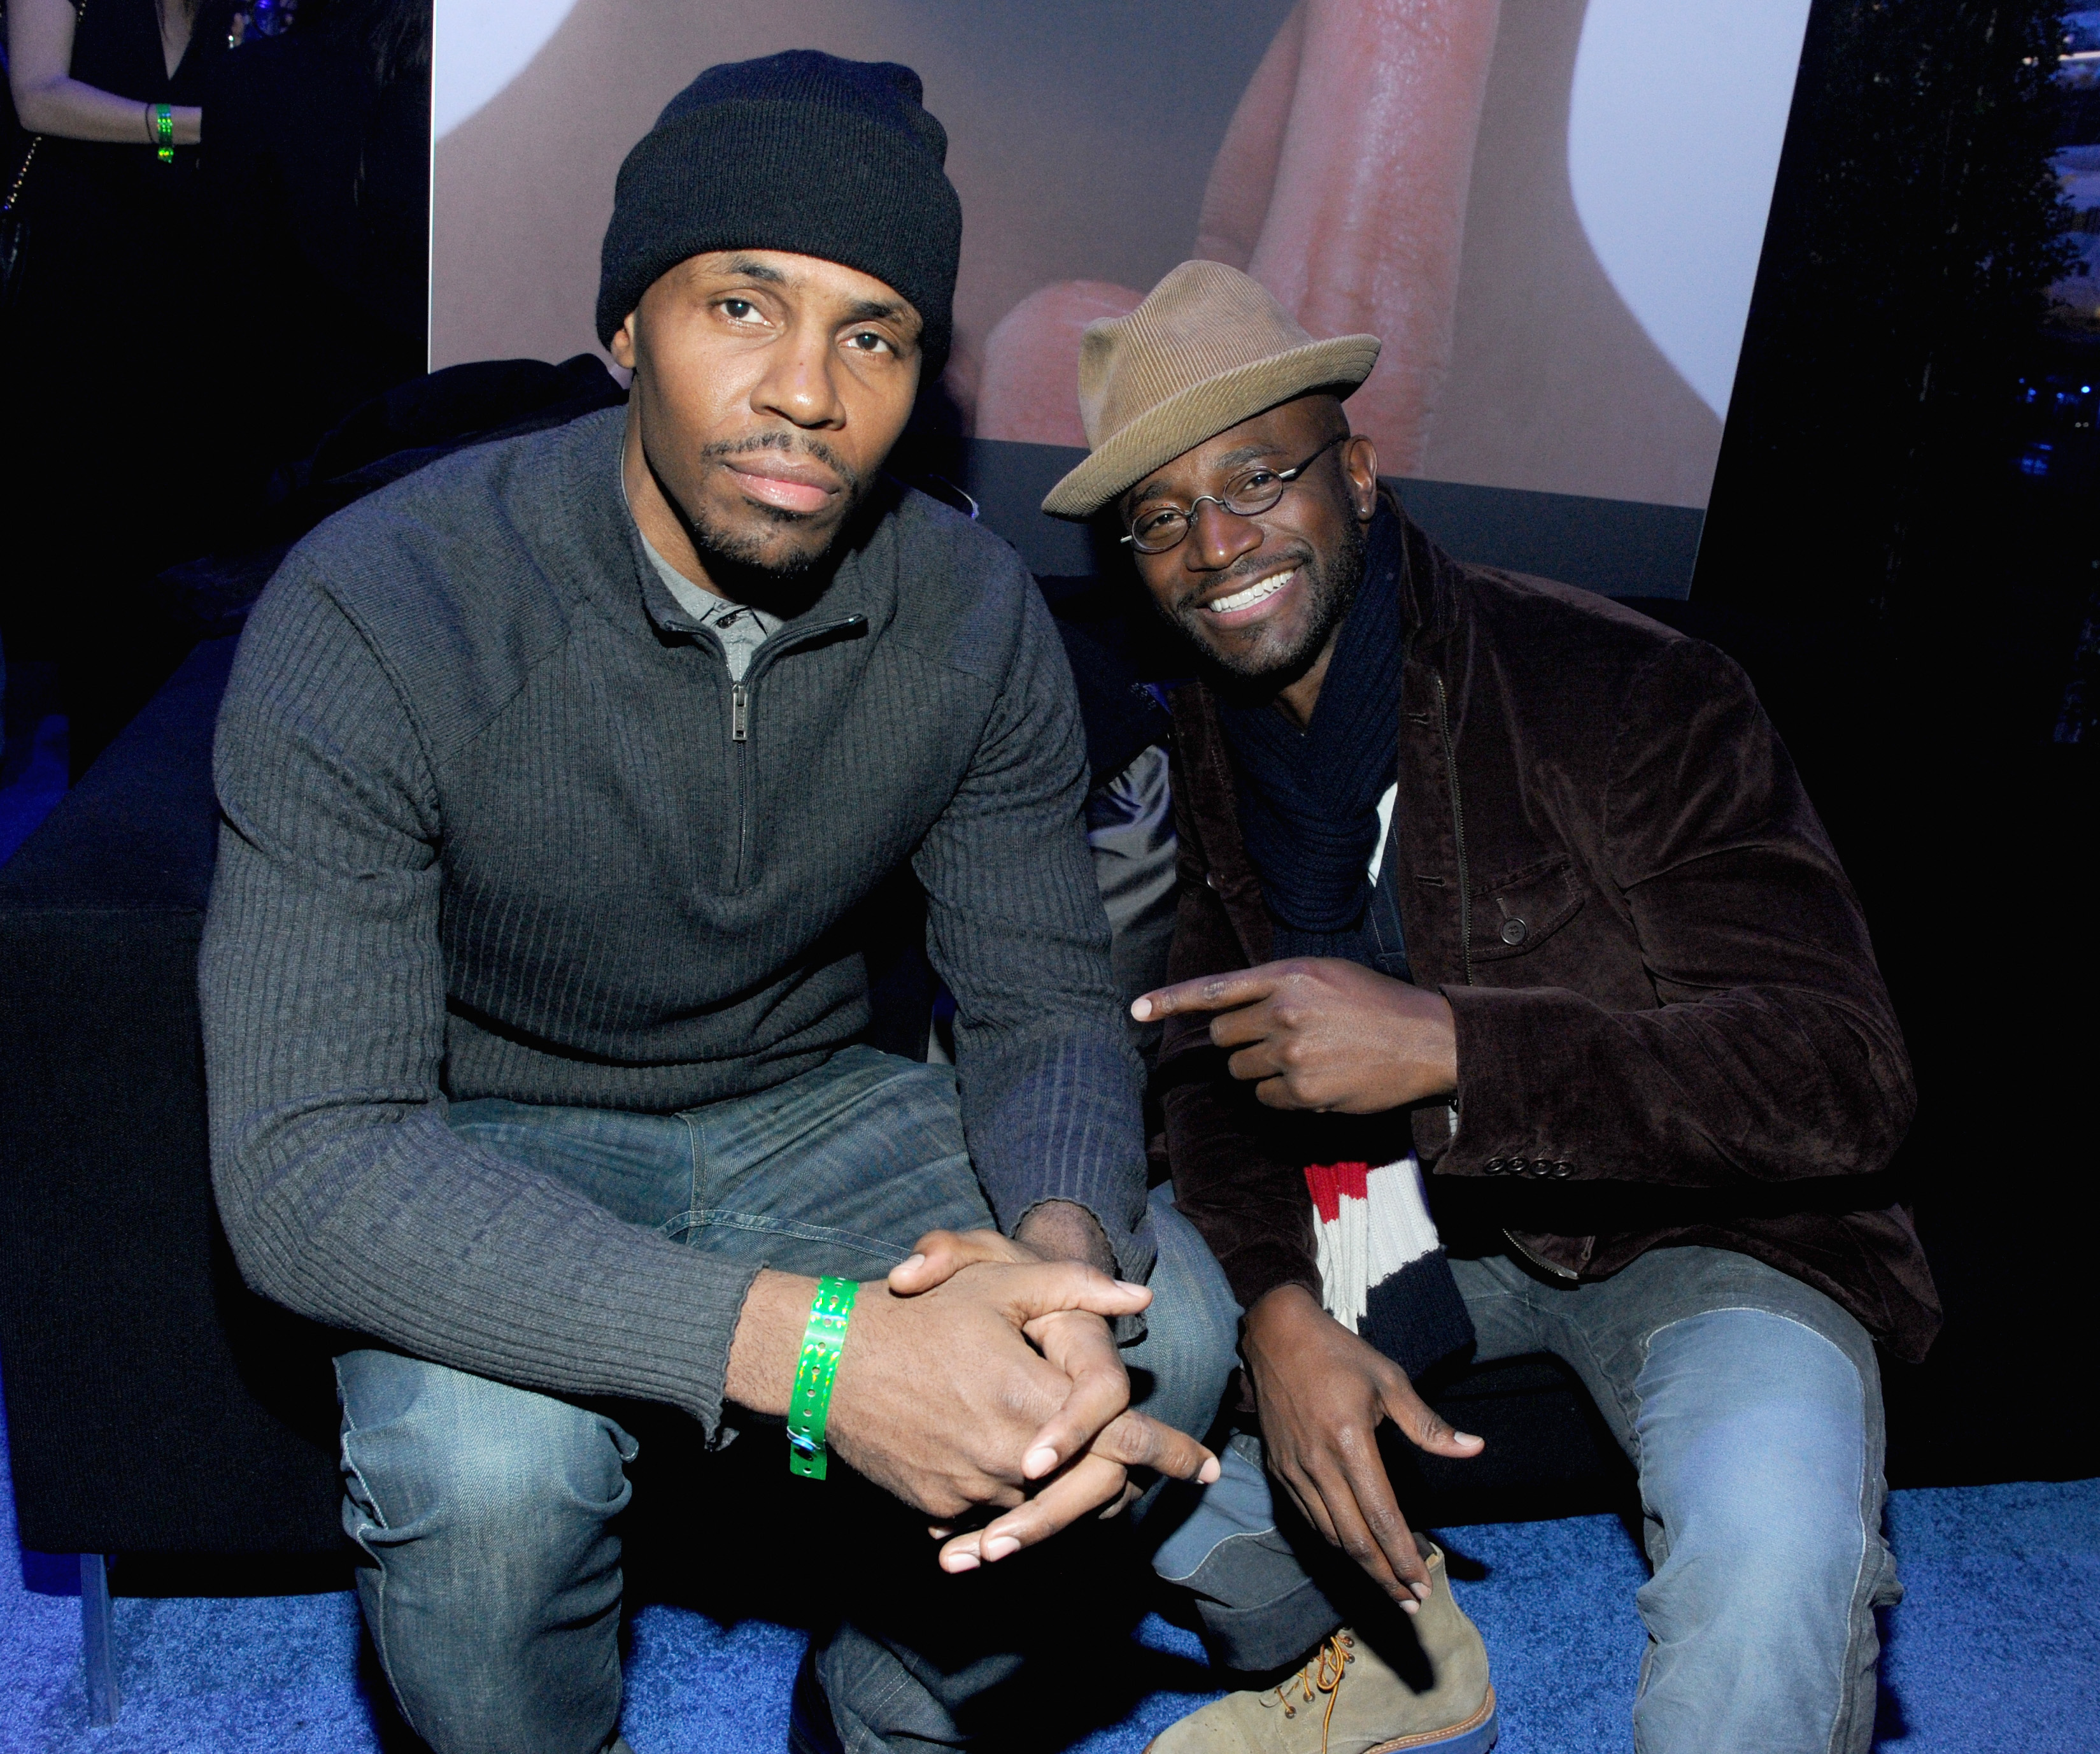 Actor Taye Diggs (R) and guest attend The Playboy Party at The Bud Light Hotel Lounge, on Friday, January 31, 2014 in New York City.  (Photo by Jamie McCarthy/Getty Images for Playboy)